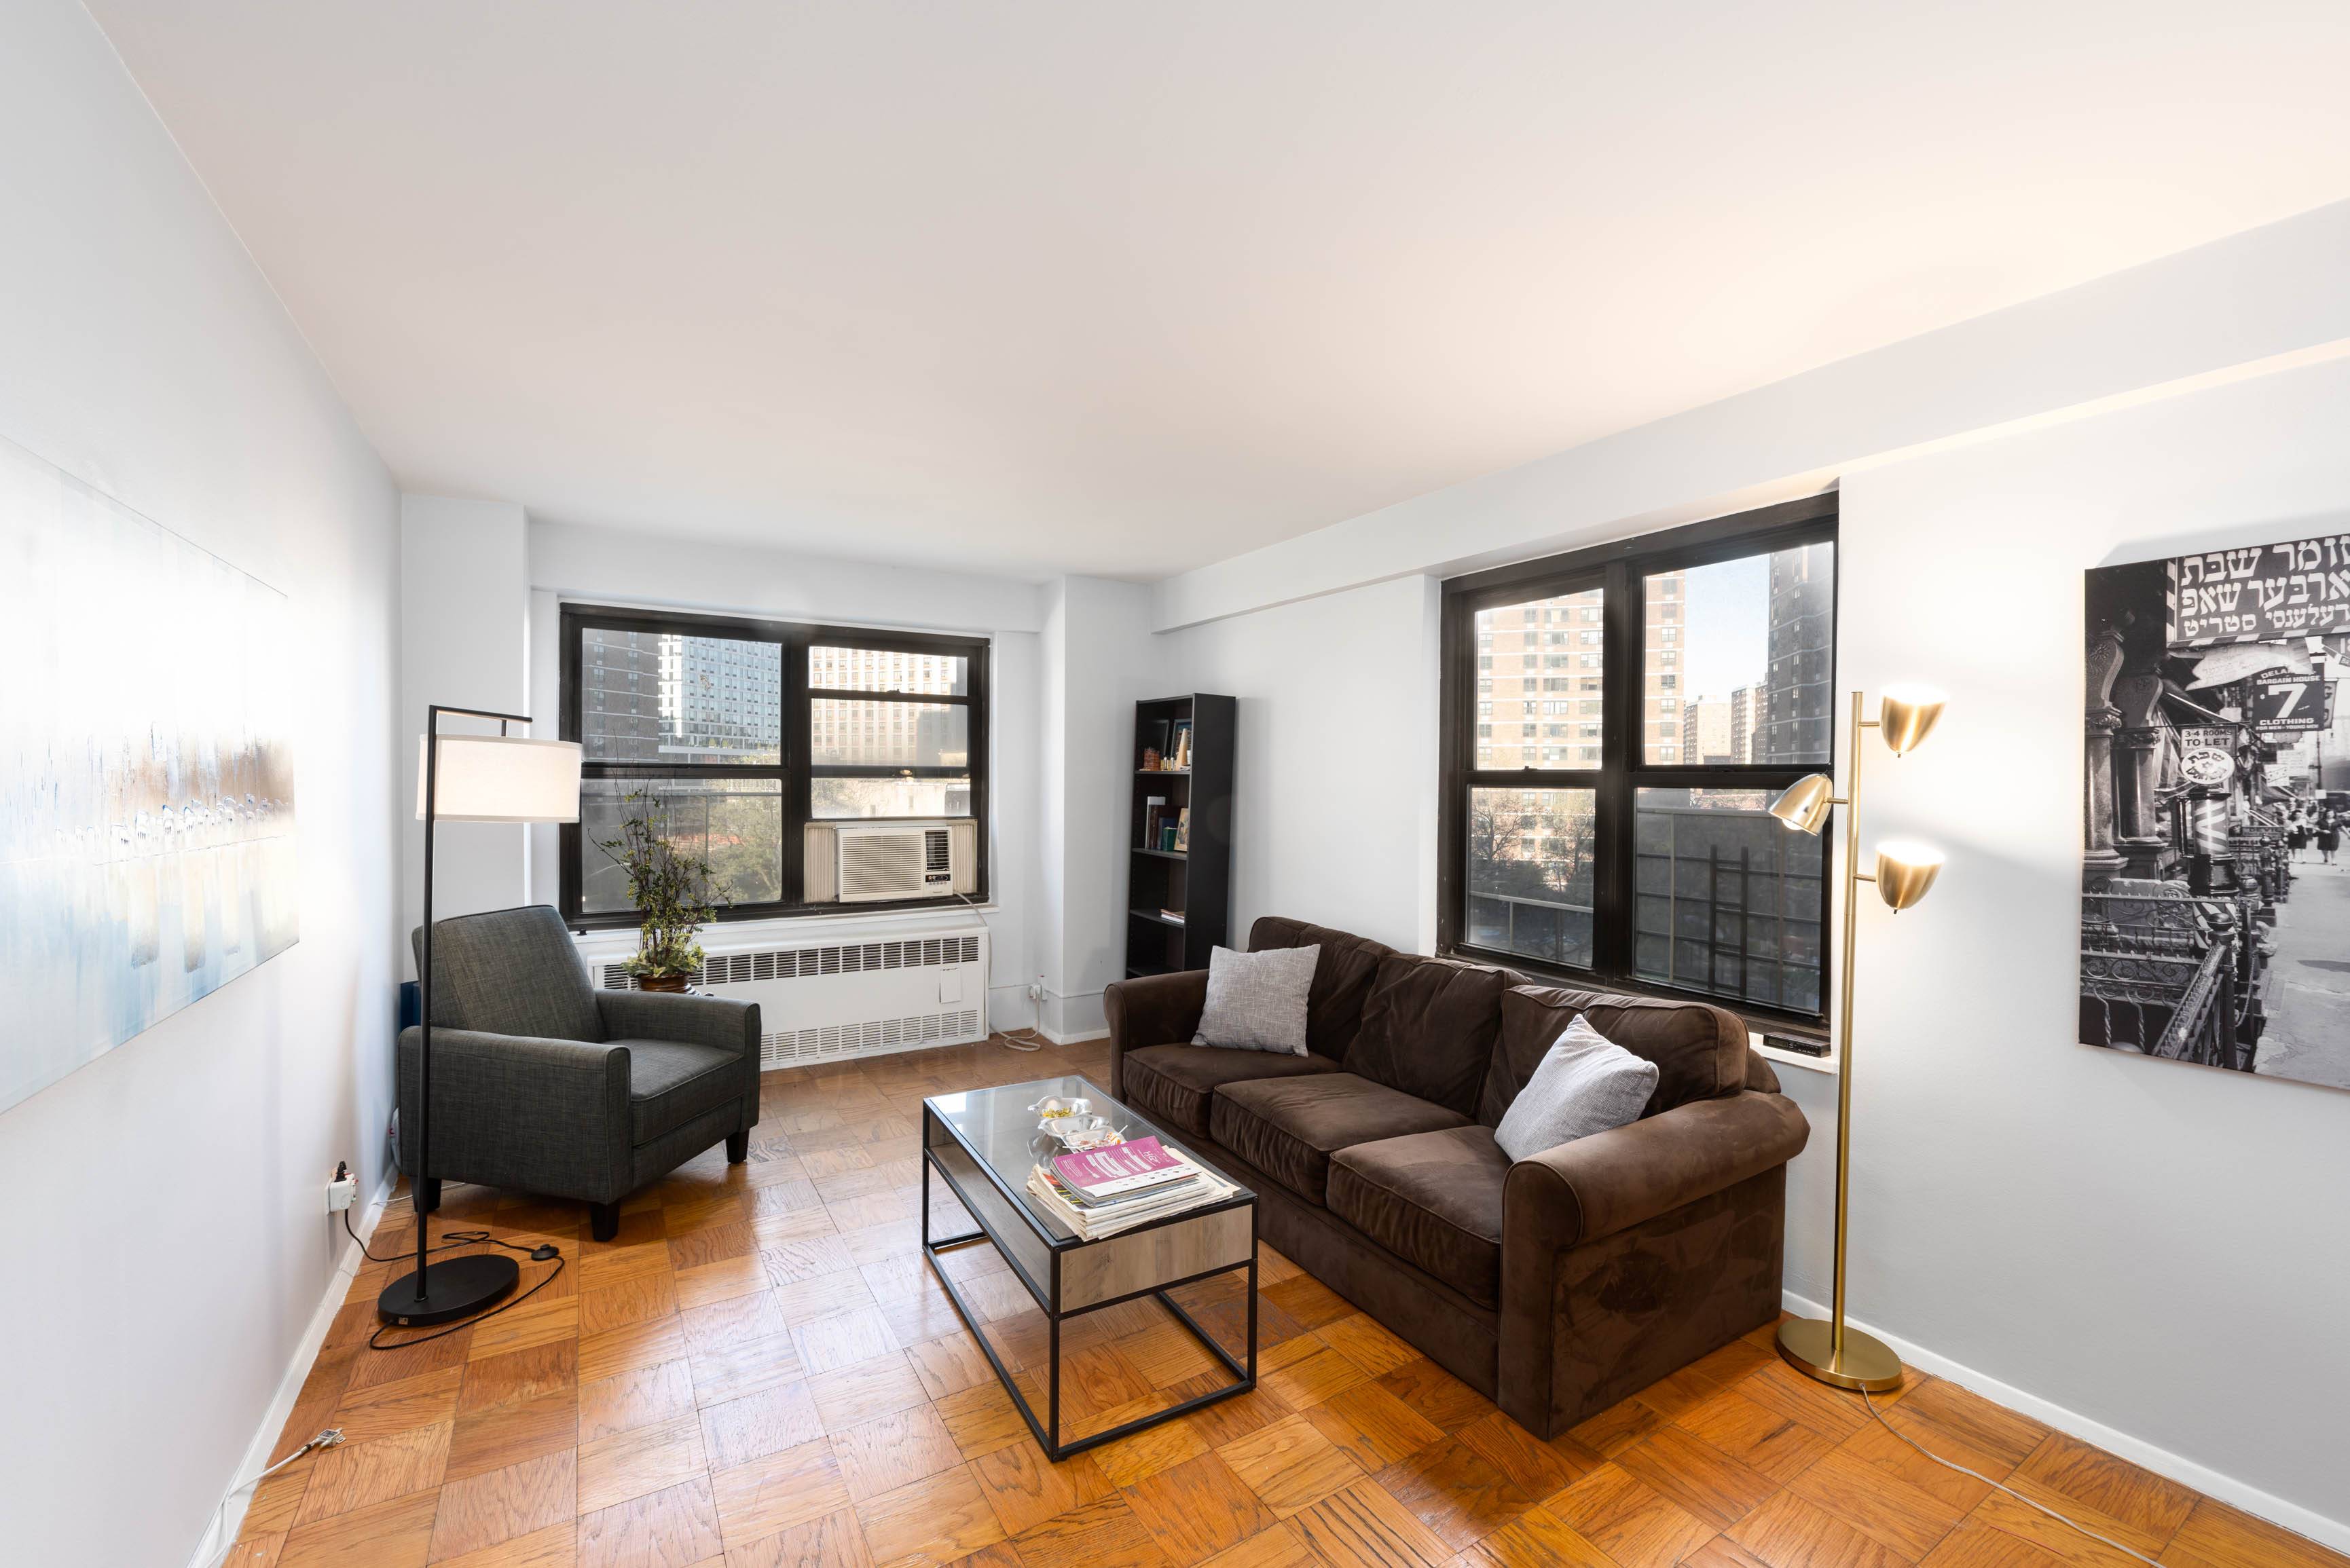 This large amp ; sunny Seward Park apartment highlights a generously sized living room with double exposures north amp ; west overlooking the co ops beautifully manicured, private park.